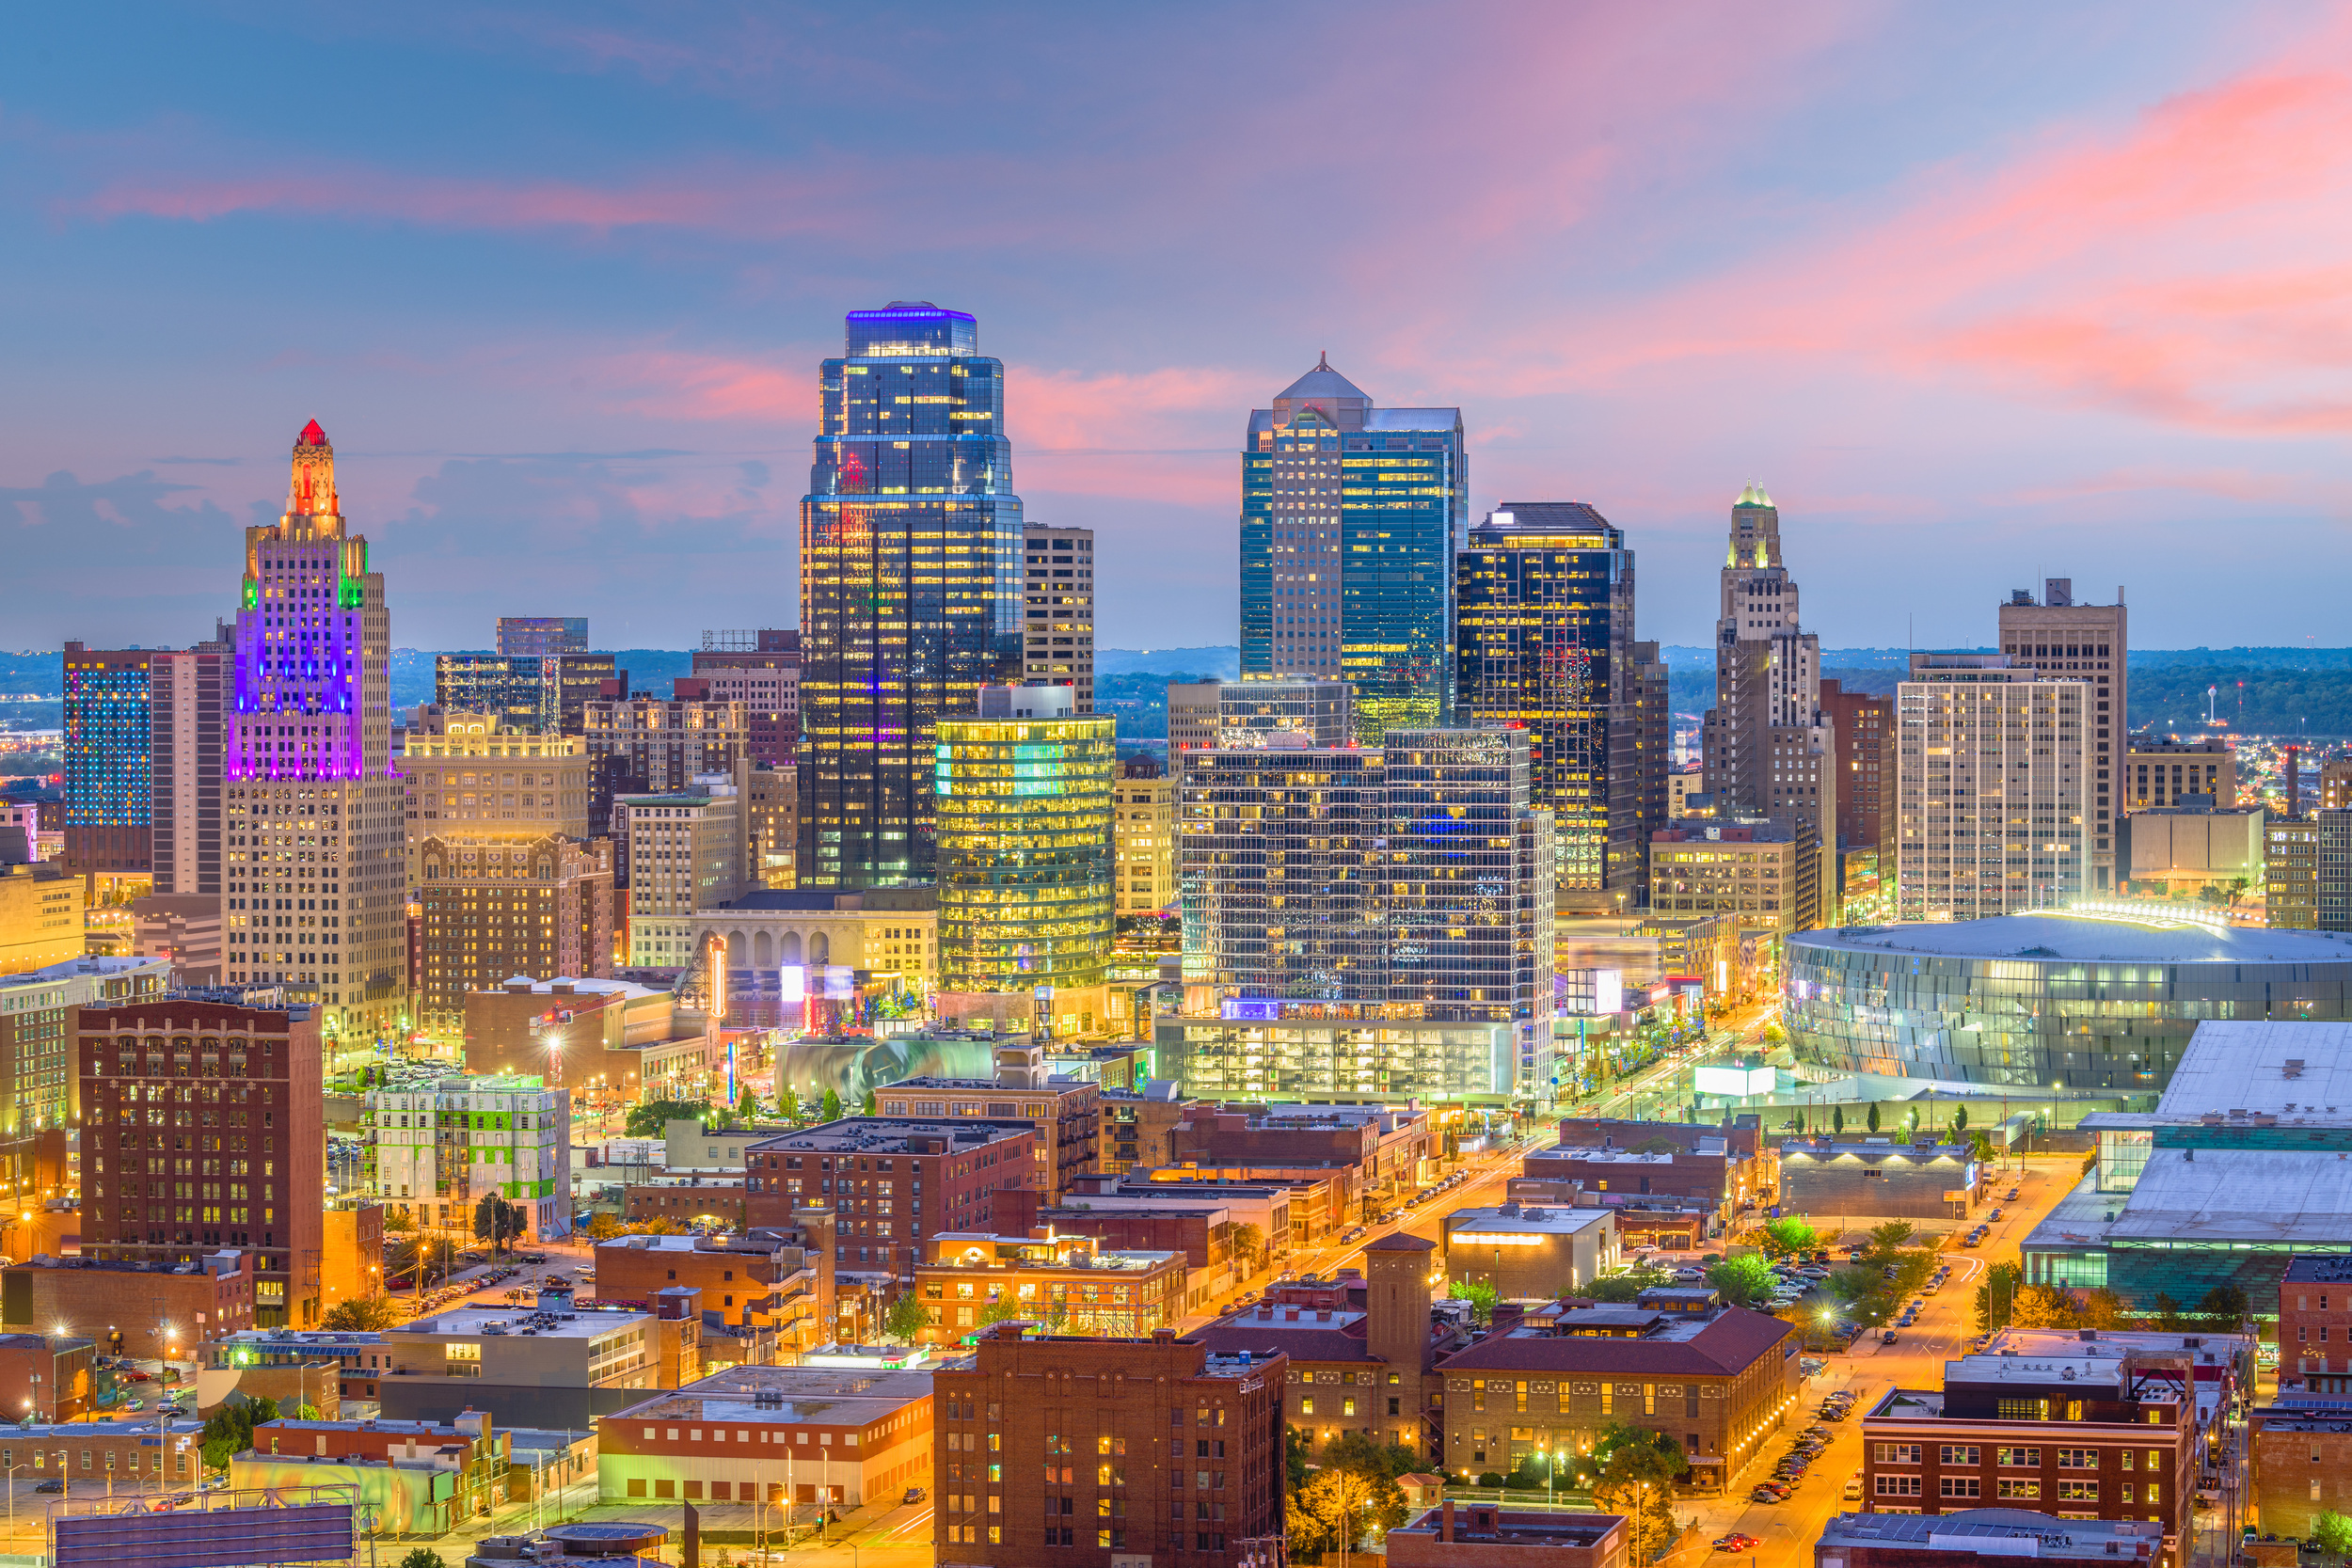 <p>Kansas City has two states' worth of good nightlife. Its bar scene is best defined by the Power and Light District, but that’s not all it offers. There's also the Country Club Plaza, 39th Street, and Westport.</p><p>You may also like: <a href='https://www.yardbarker.com/lifestyle/articles/18_things_you_think_are_normal_but_are_actually_uniquely_american/s1__39111167'>18 things you think are normal but are actually uniquely American</a></p>